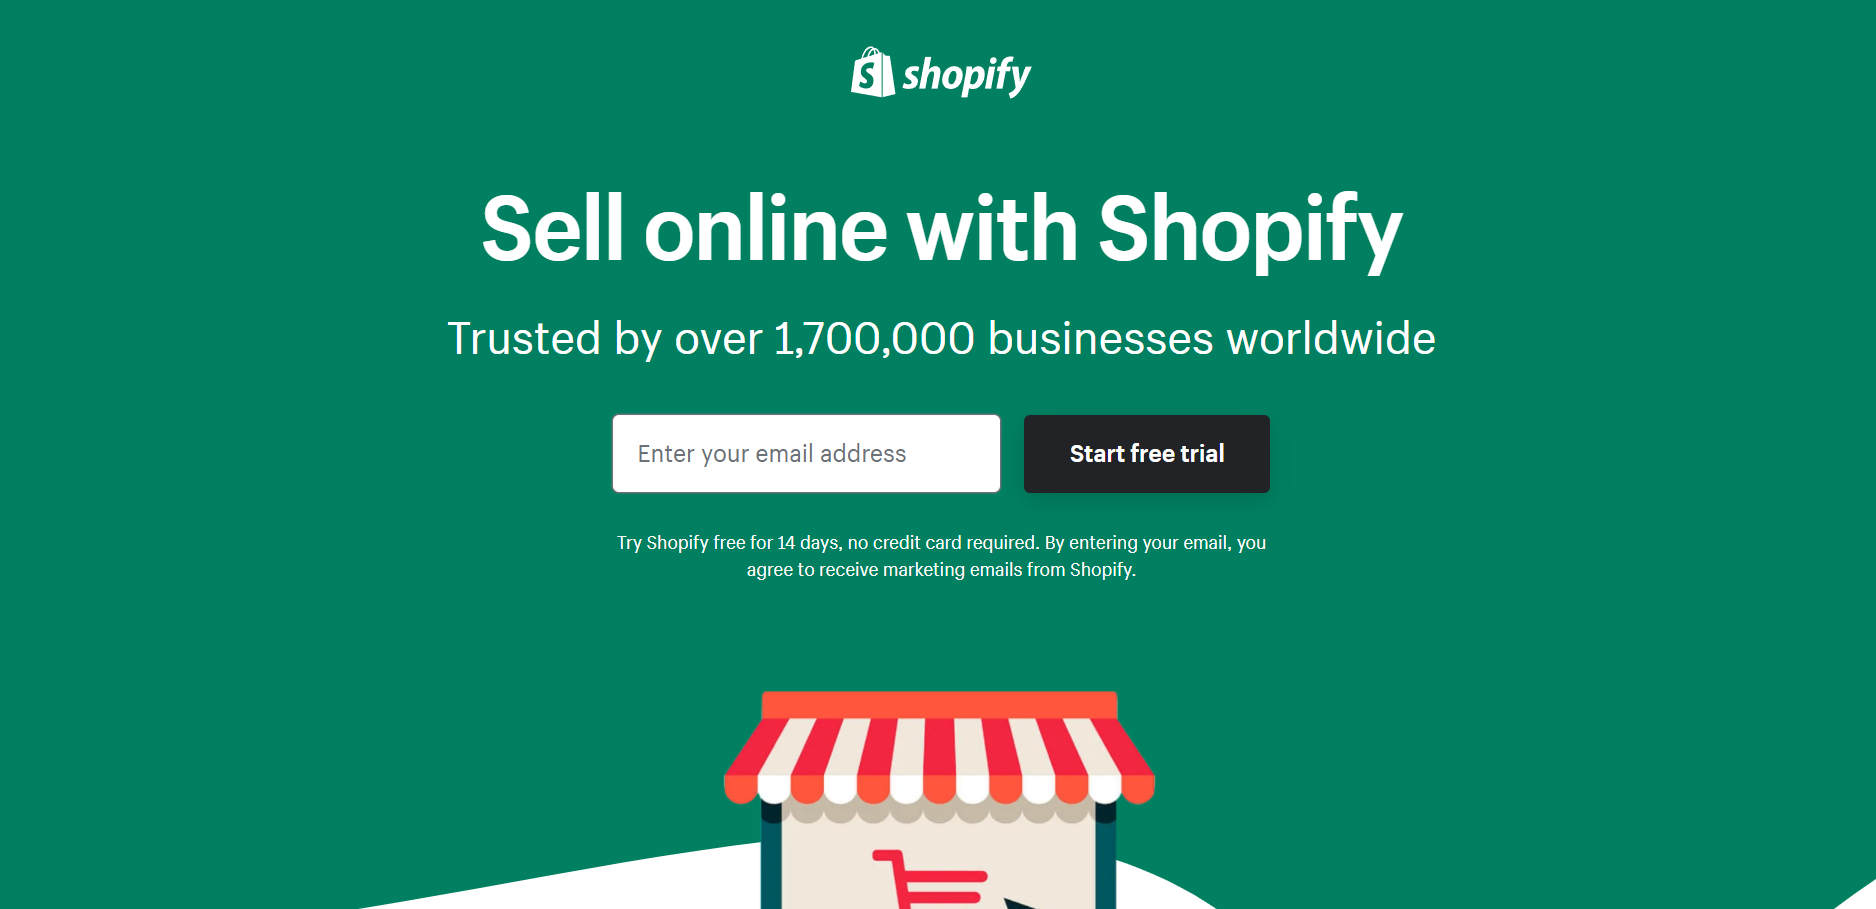 What is Shopify used for